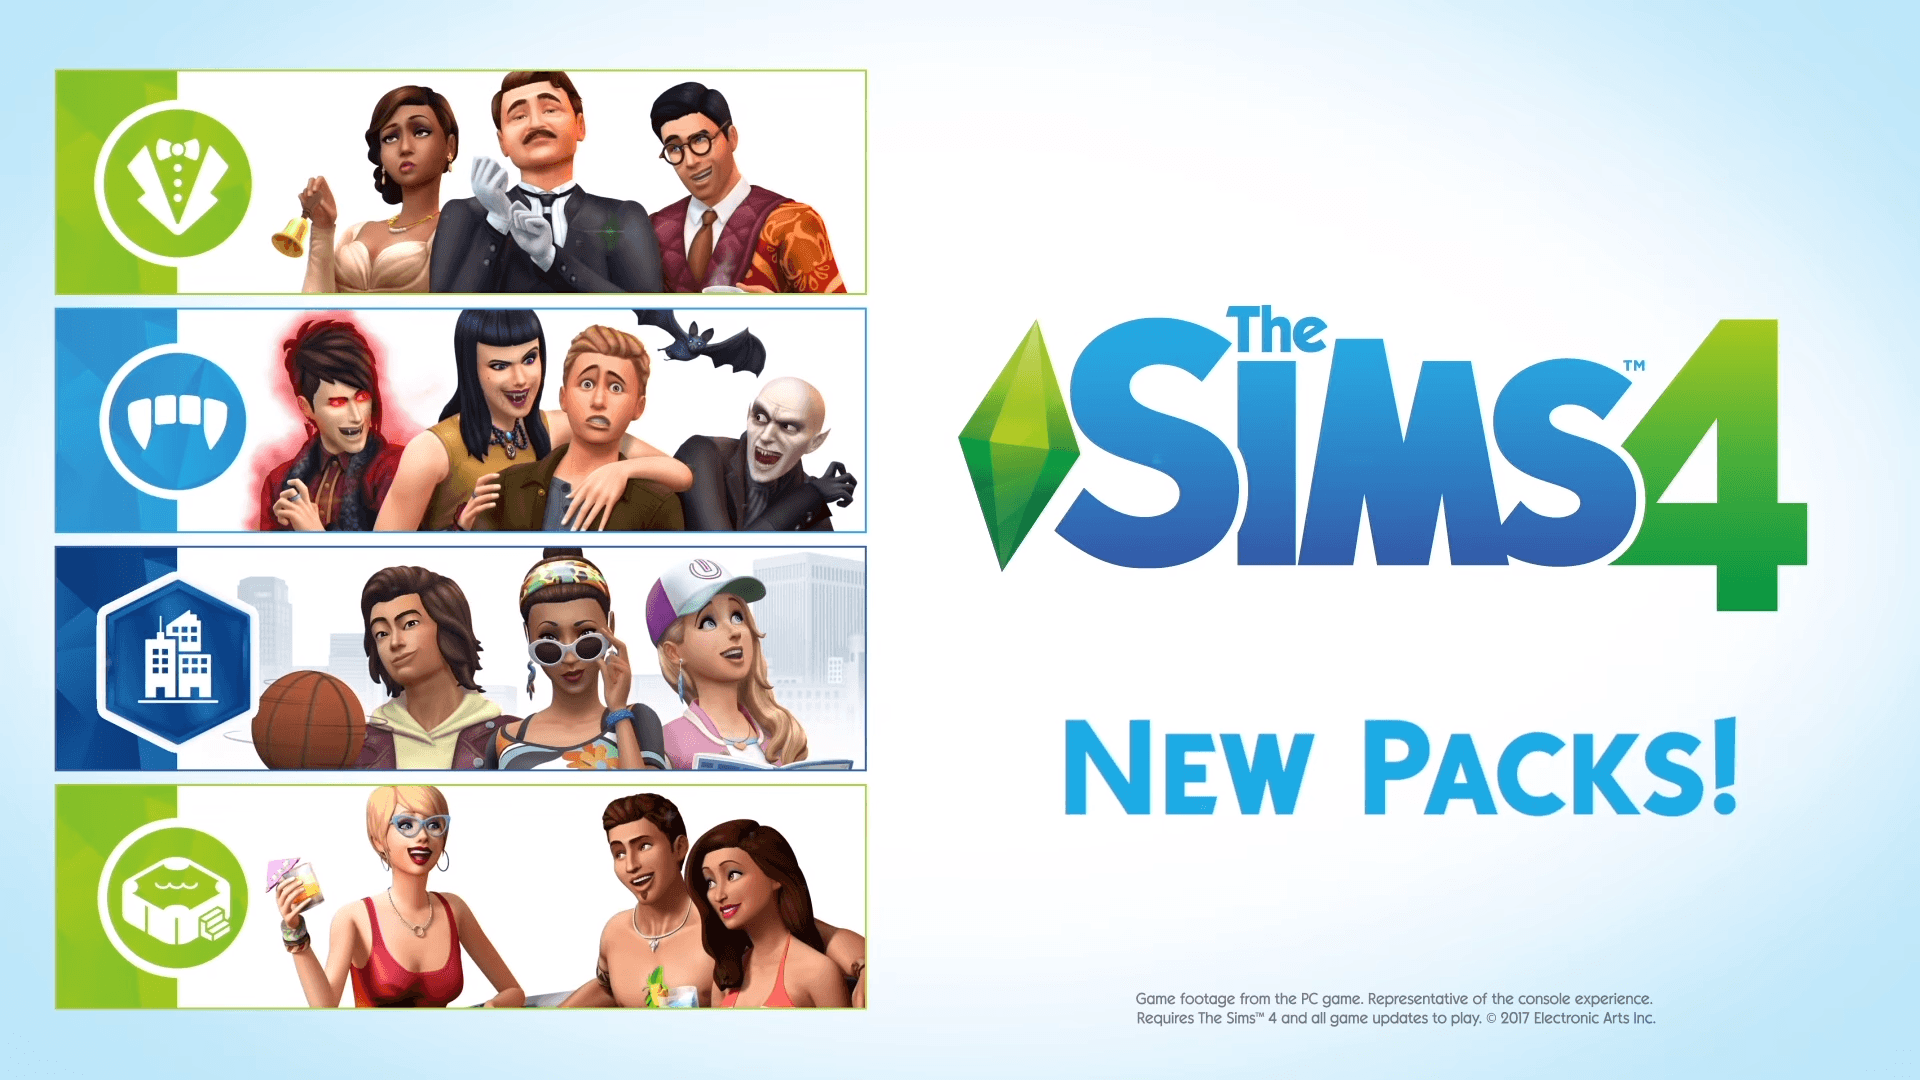 the sims 4 all dlc 2021